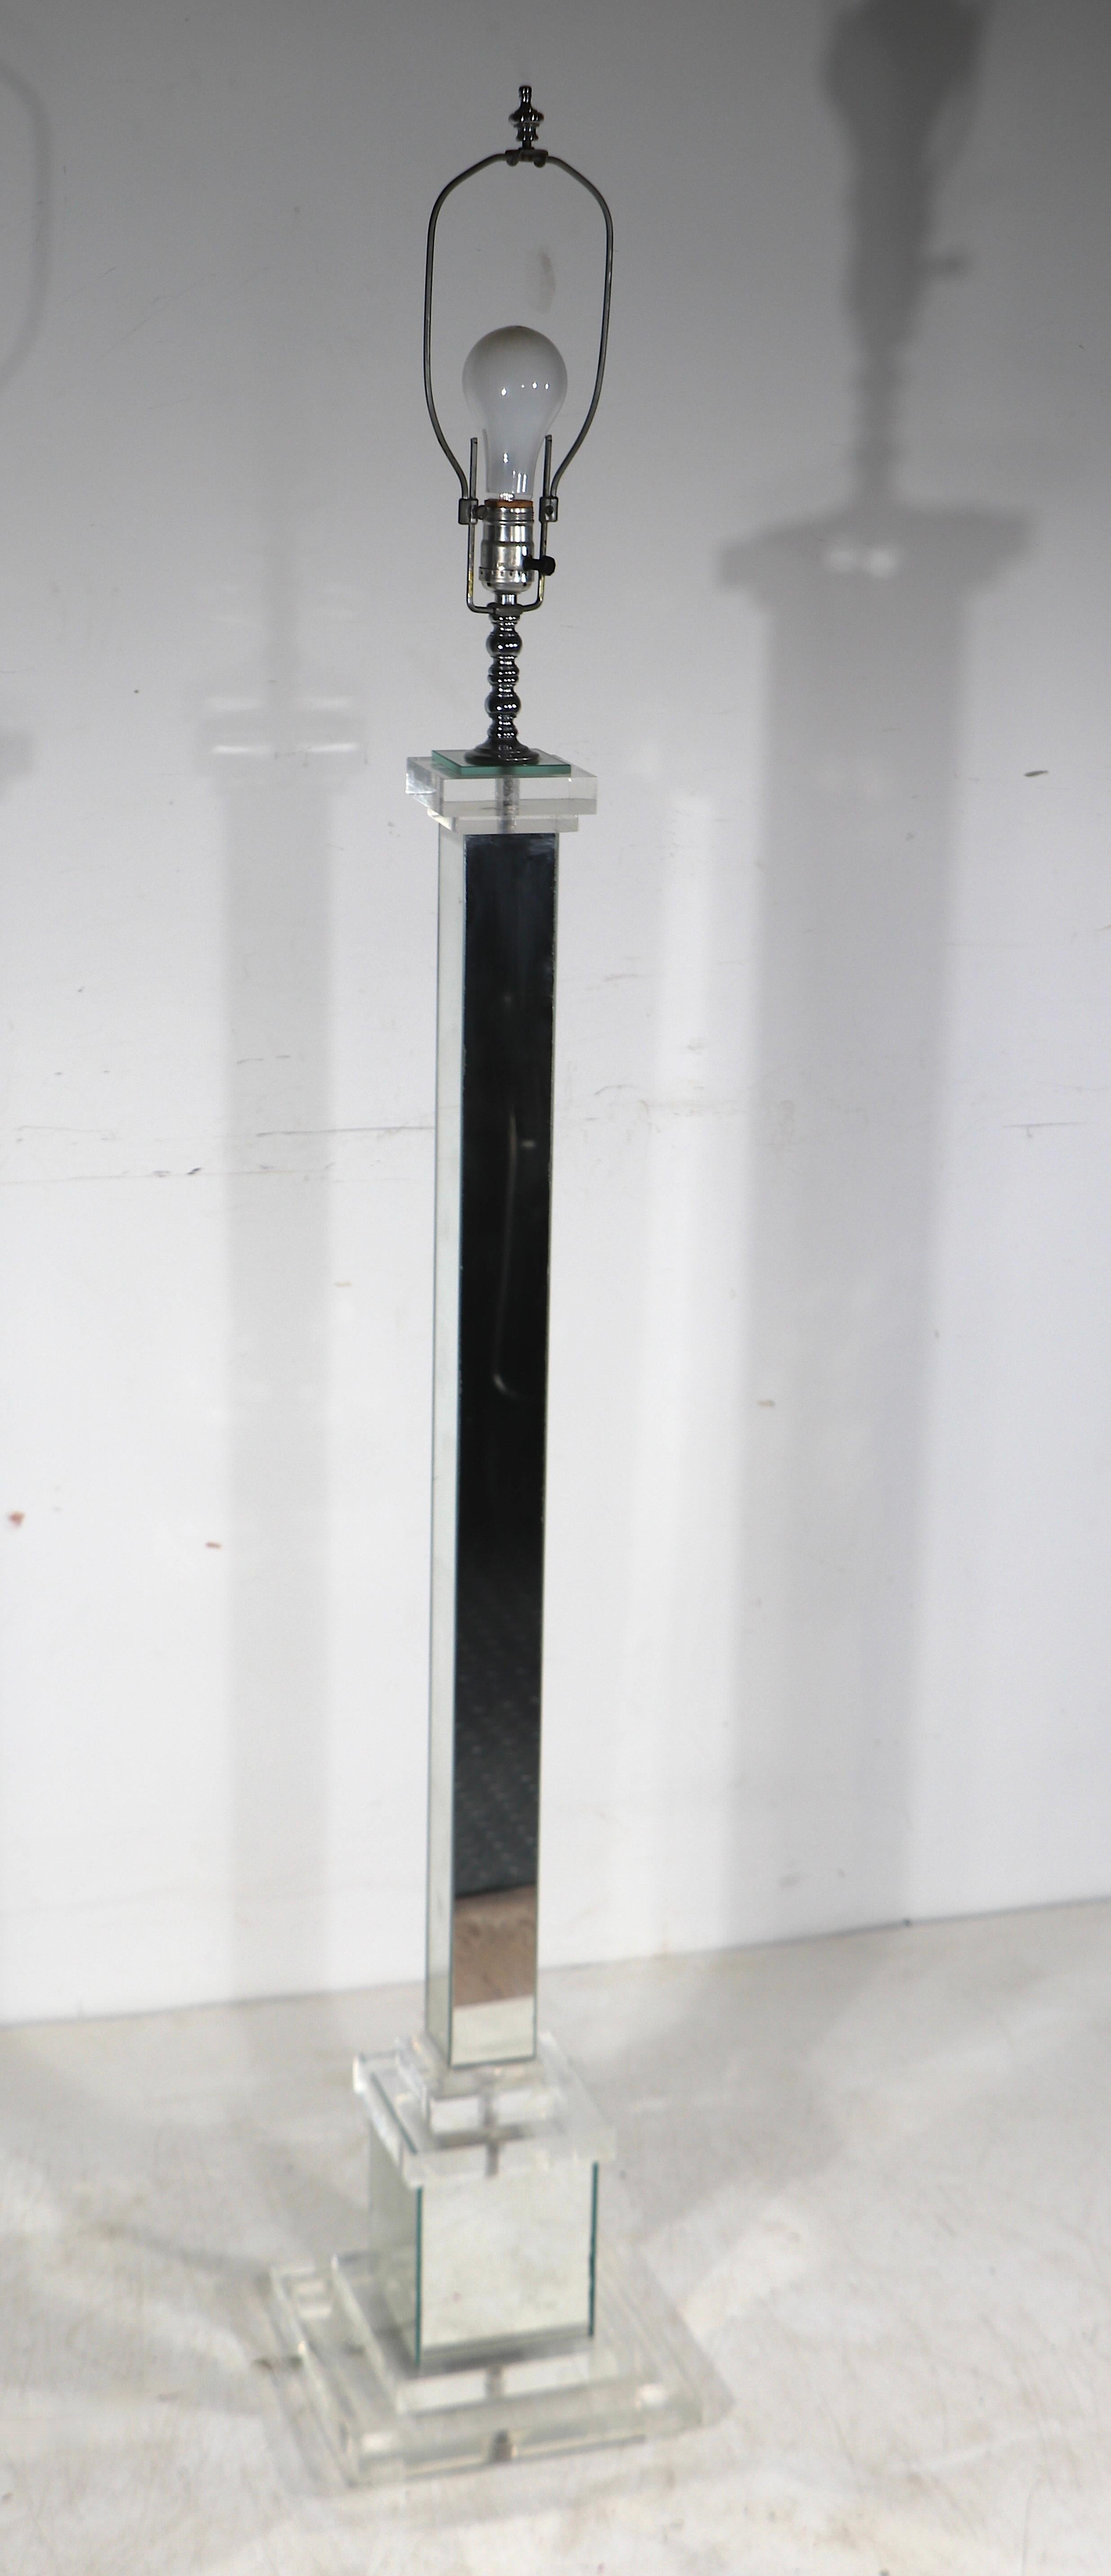 Exceptional Hollywood Regency  style floor lamp having a stepped lucite base, mirrored vertical post and lucite capitol. This chic lamp is ion very fine, clean, original and ready to use condition, showing only light wear, normal and consistent with